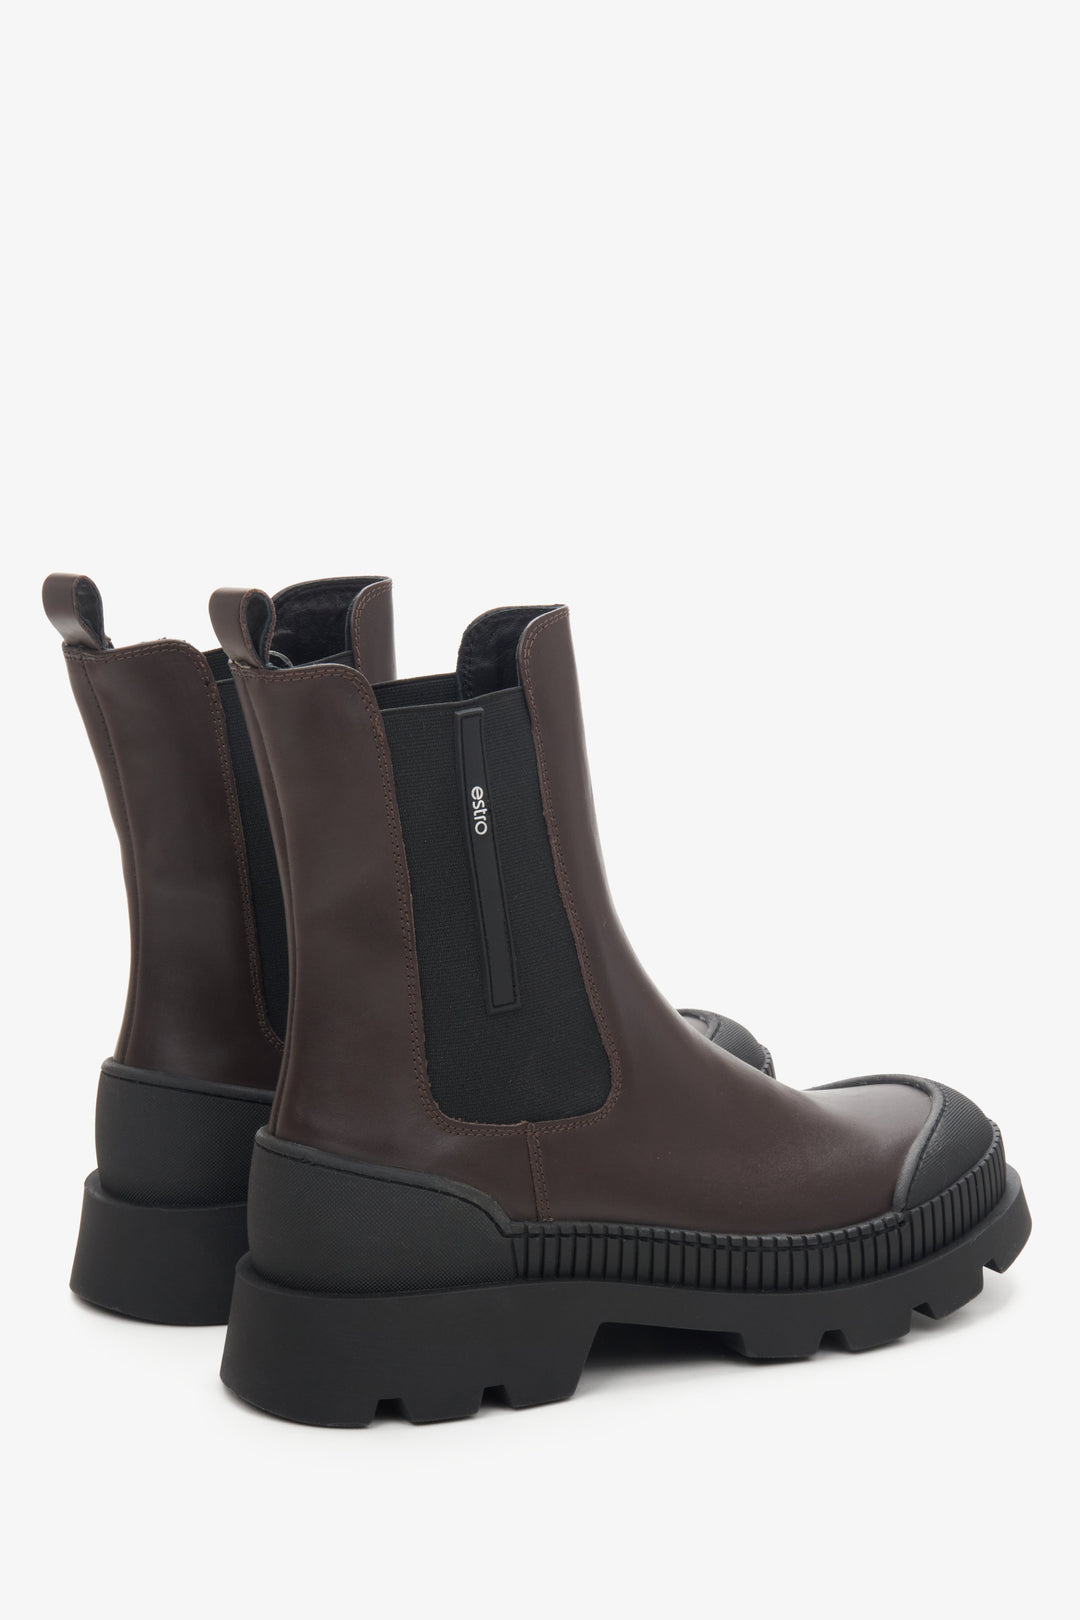 Brown-black Estro women's Chelsea boots made of genuine leather - close-up on the side seam and heel.